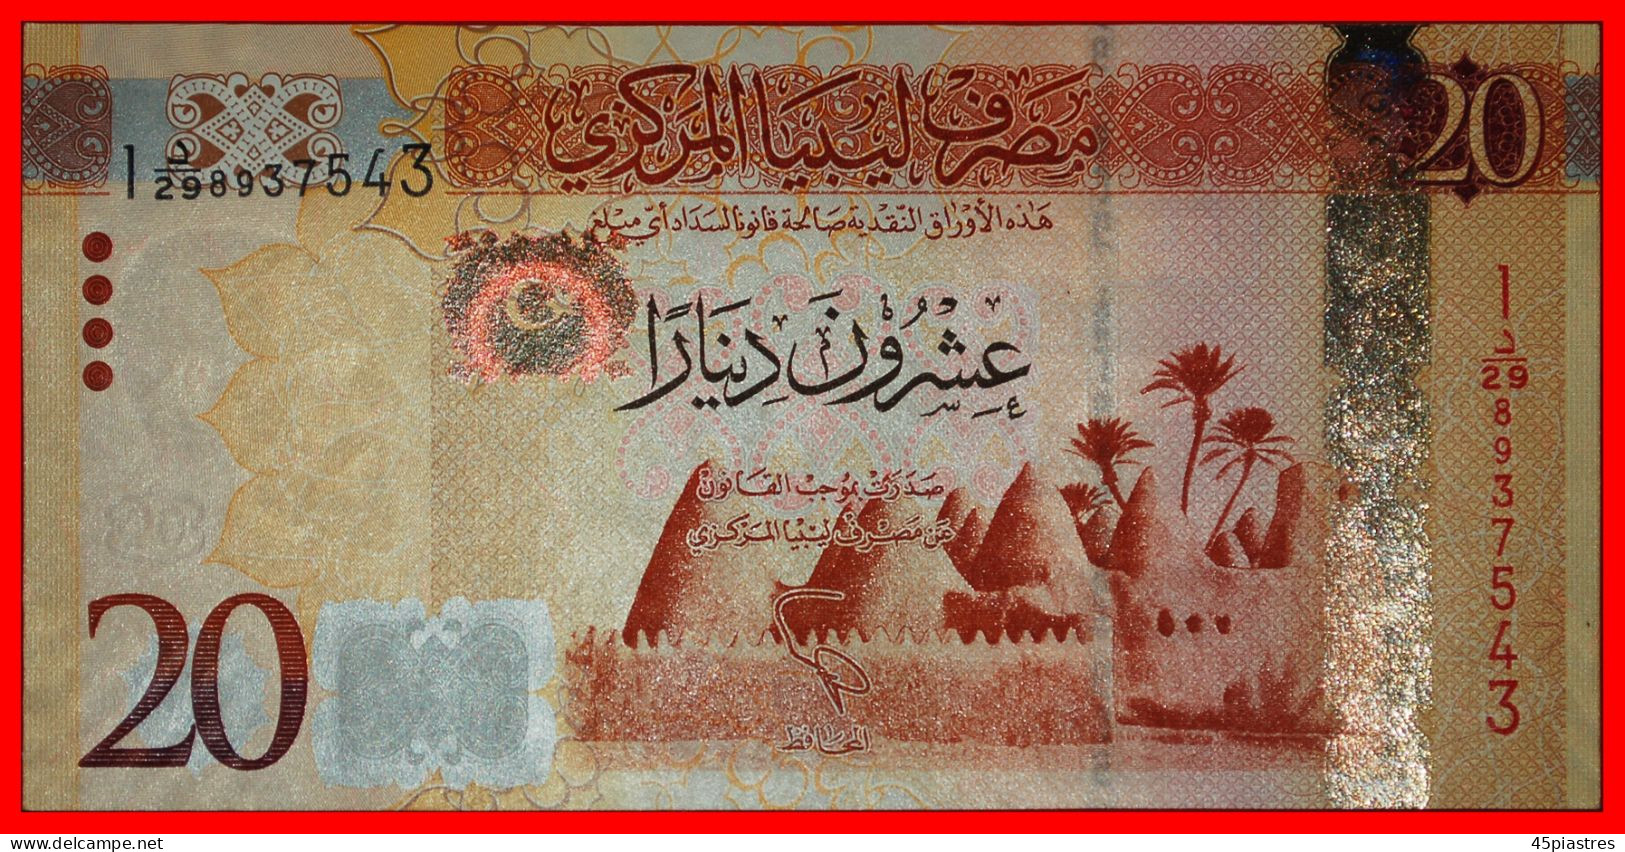 * Russia (the USSR), GREAT BRITAIN: LIBYA  20 DINARS (2013)! CRISP! JUST PUBLISHED!· LOW START!  NO RESERVE! - Libye